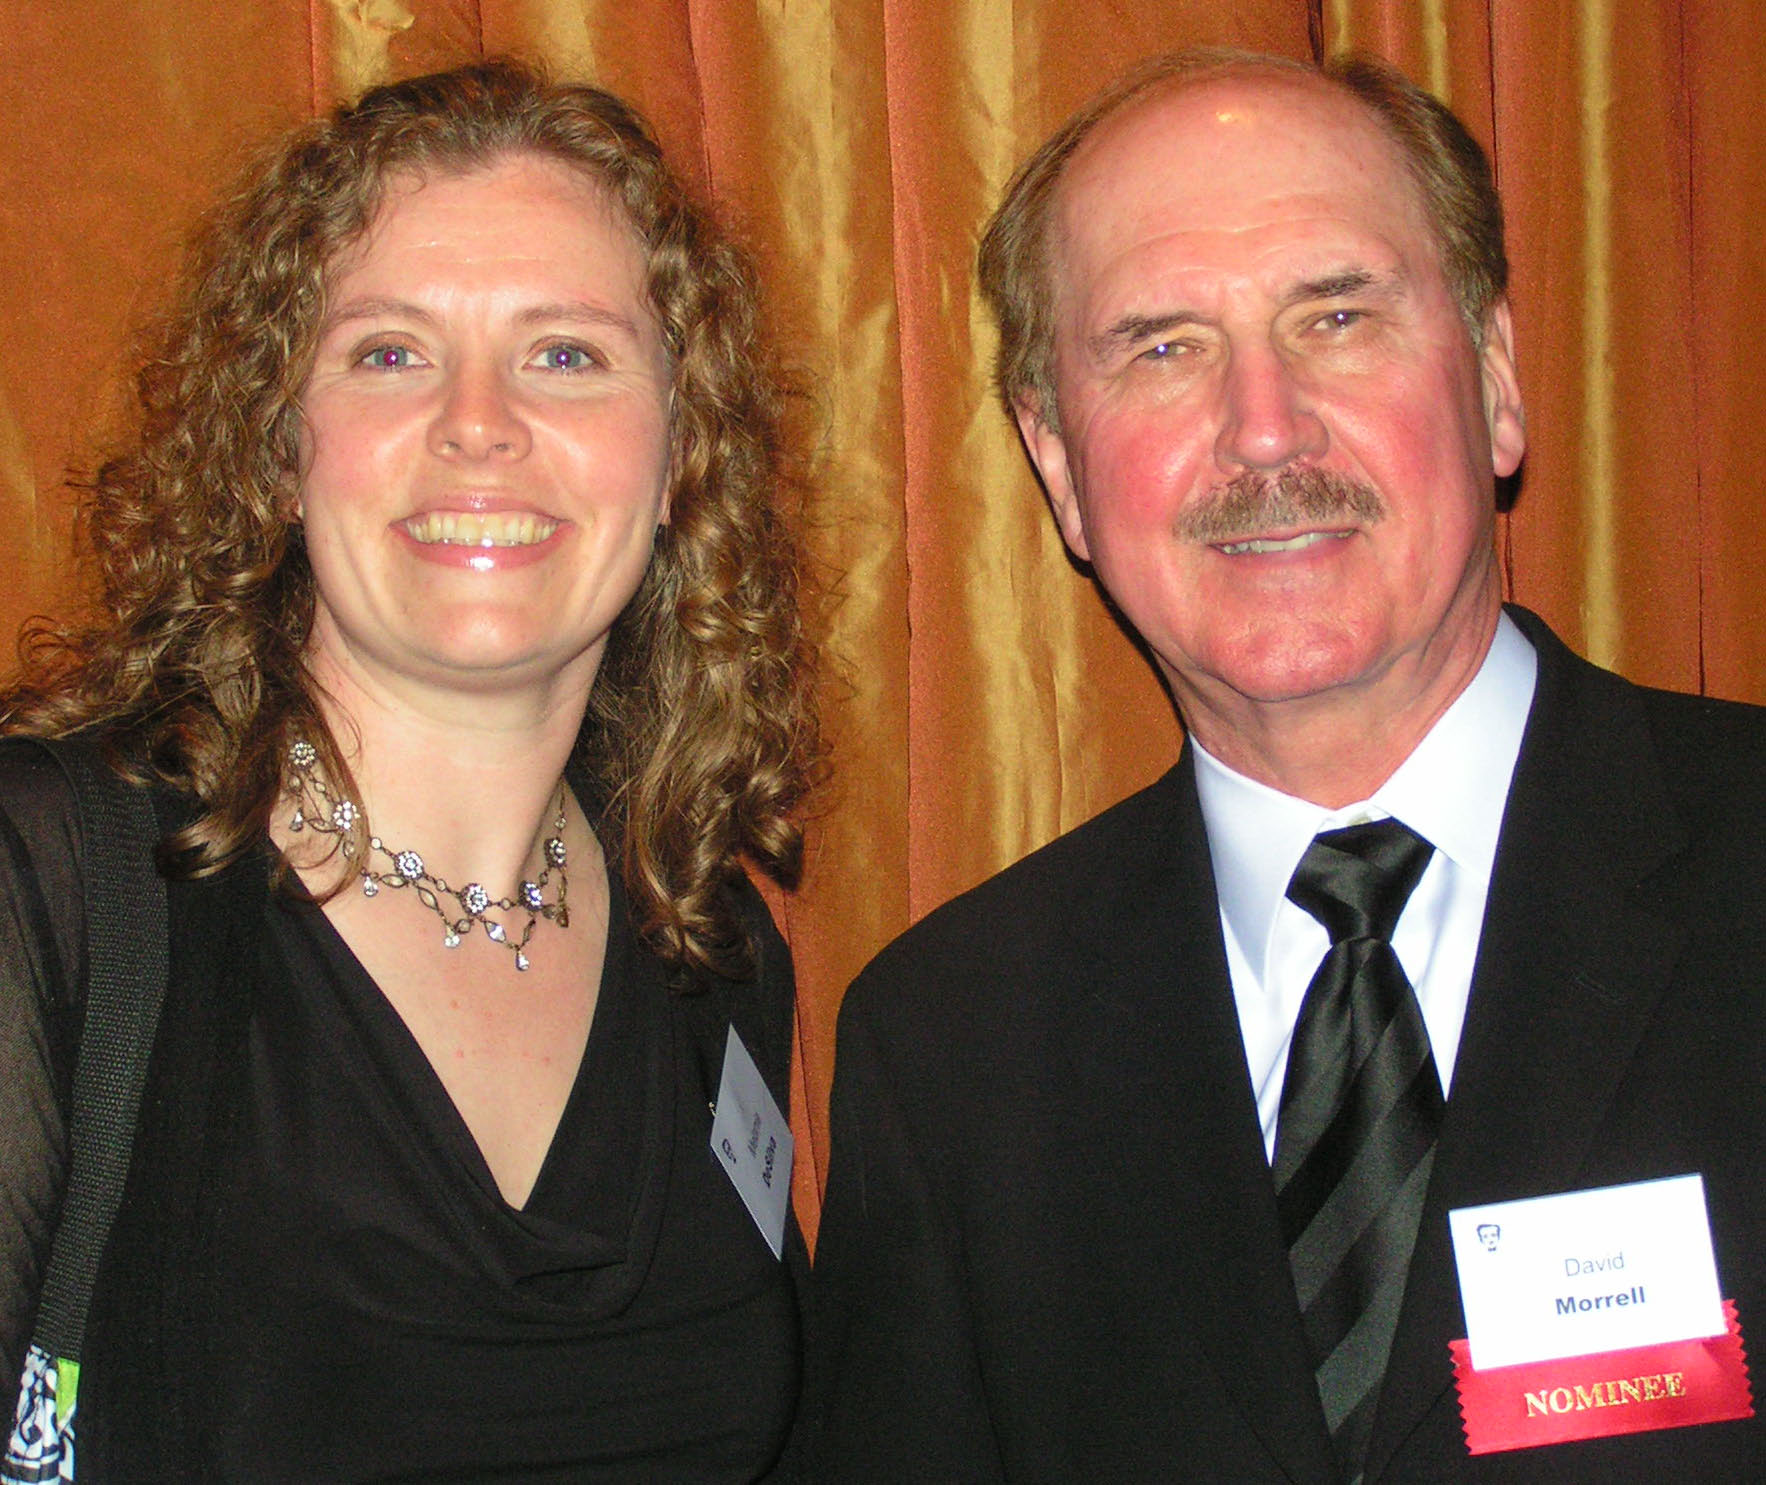 Bruce DeSilva’s Daughter Melanie with Nominee David Morrell/ courtesy of author